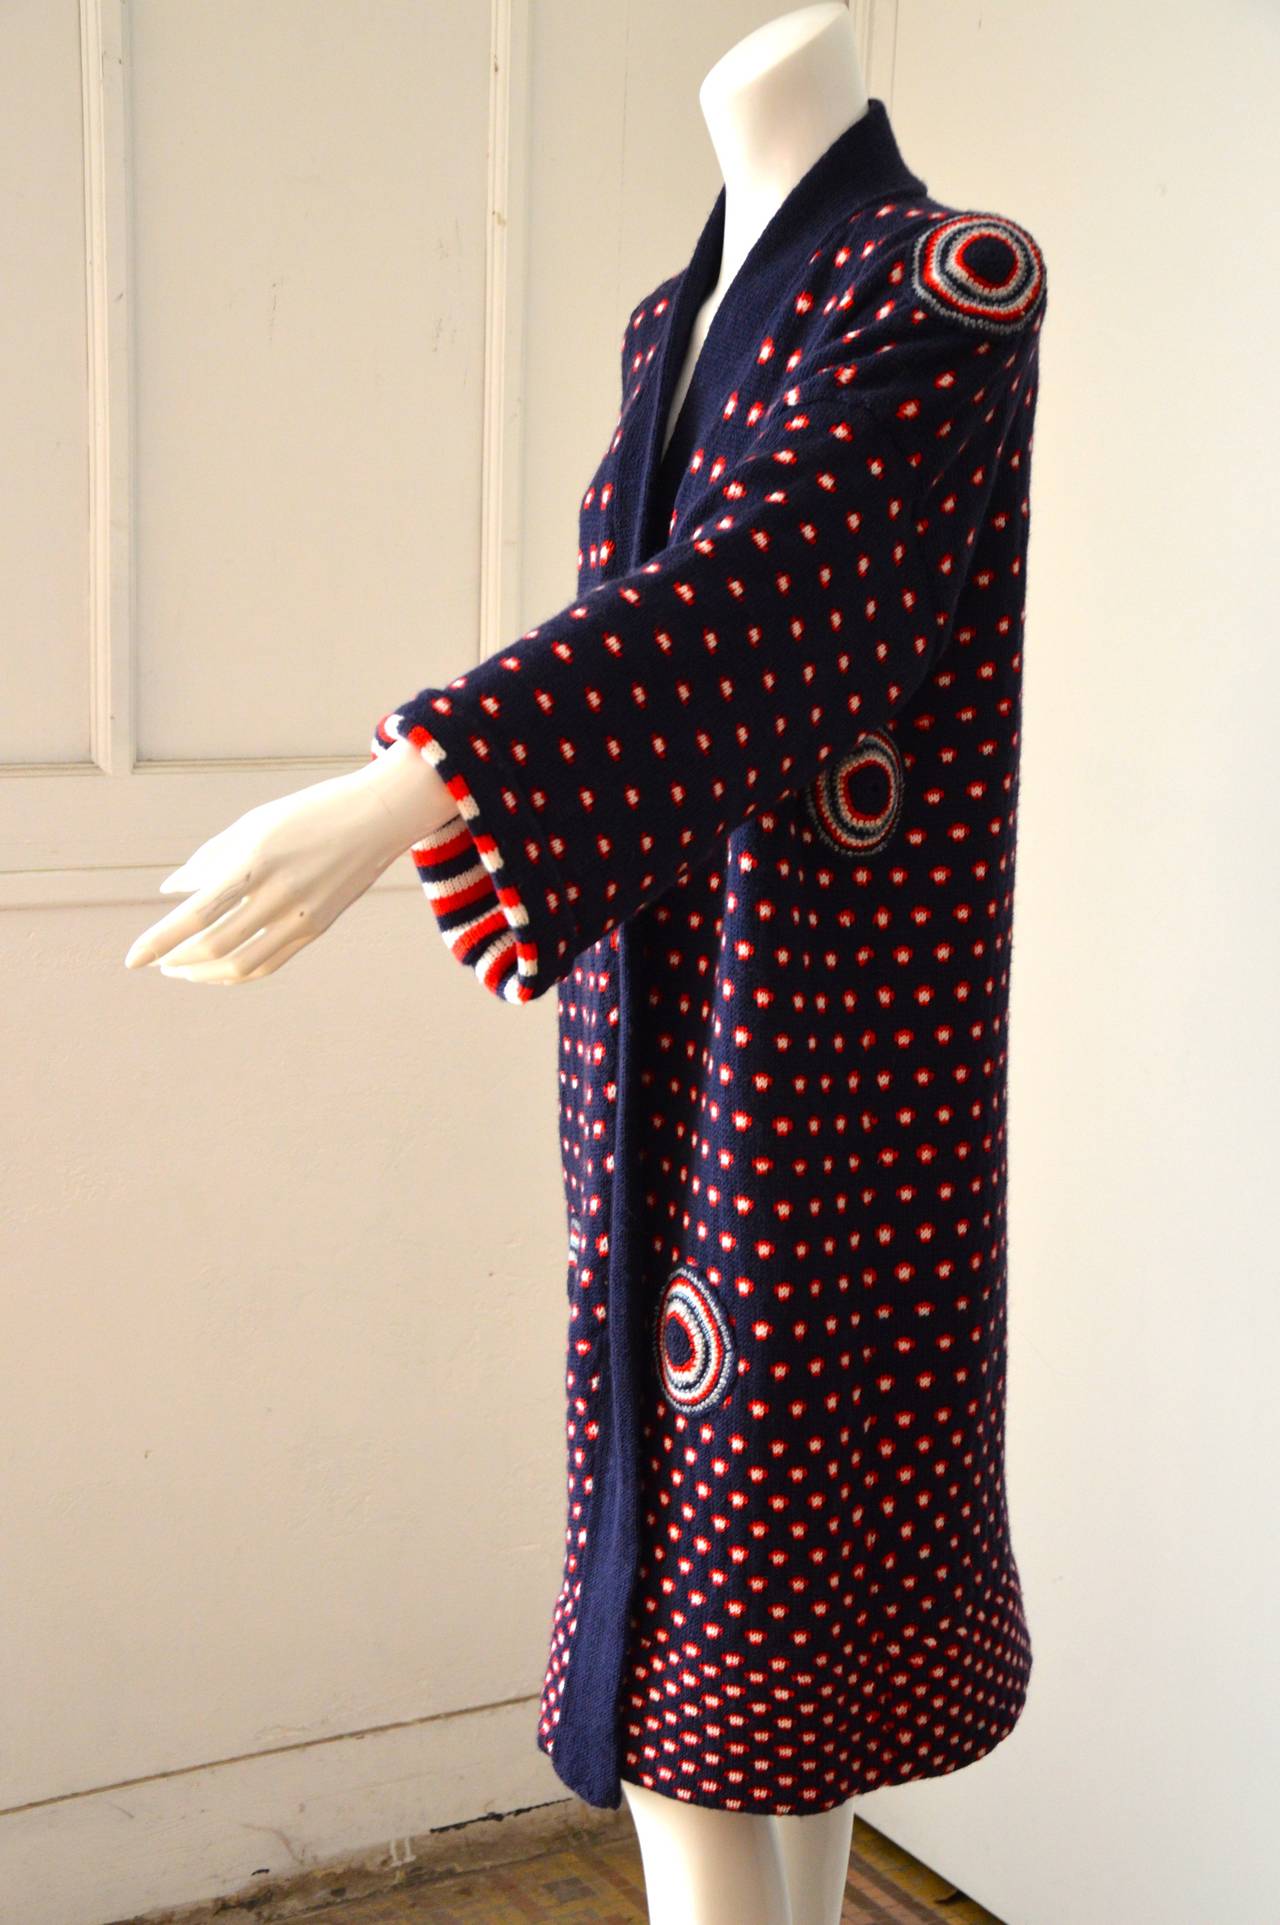 A very rare Mildred Boulton red white and blue knitted maxi coat, 1970s. with matching scarf.
The knitwear was one of Mildred Boulton most successful ventures, creating countless fans of the beautifully subtle palette and extraordinary mixes of